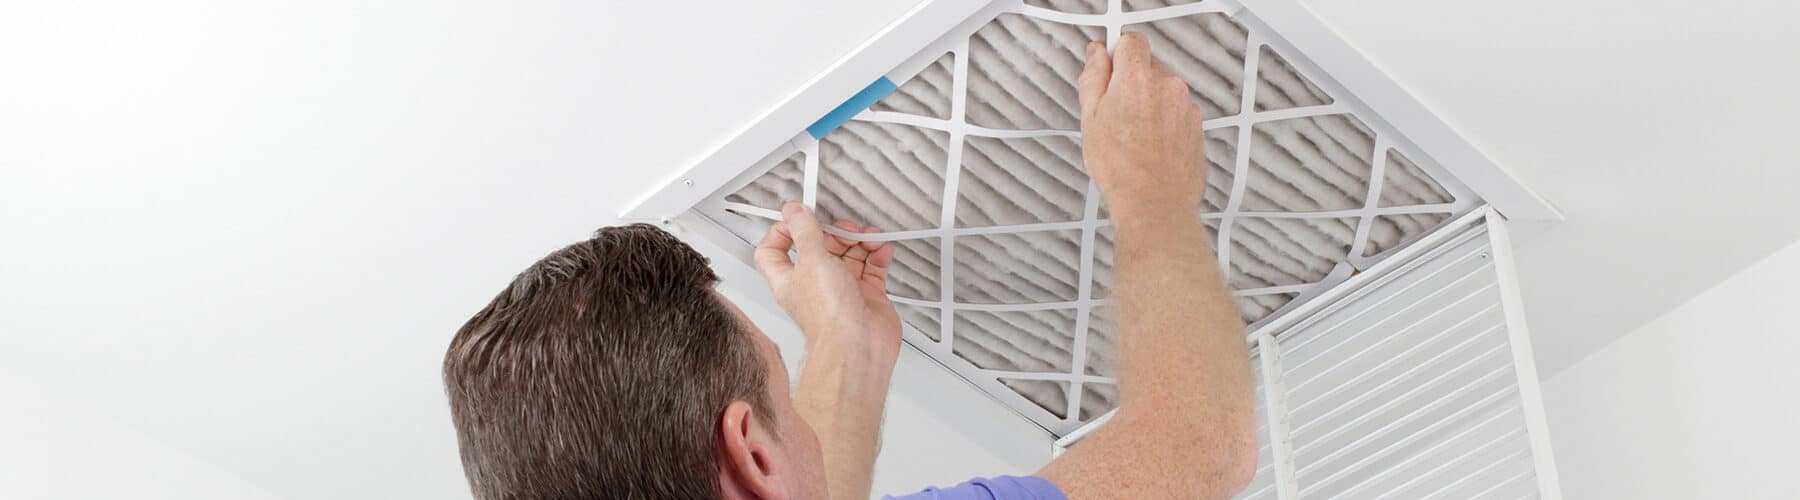 a man changing a ceiling air filter for his furnace